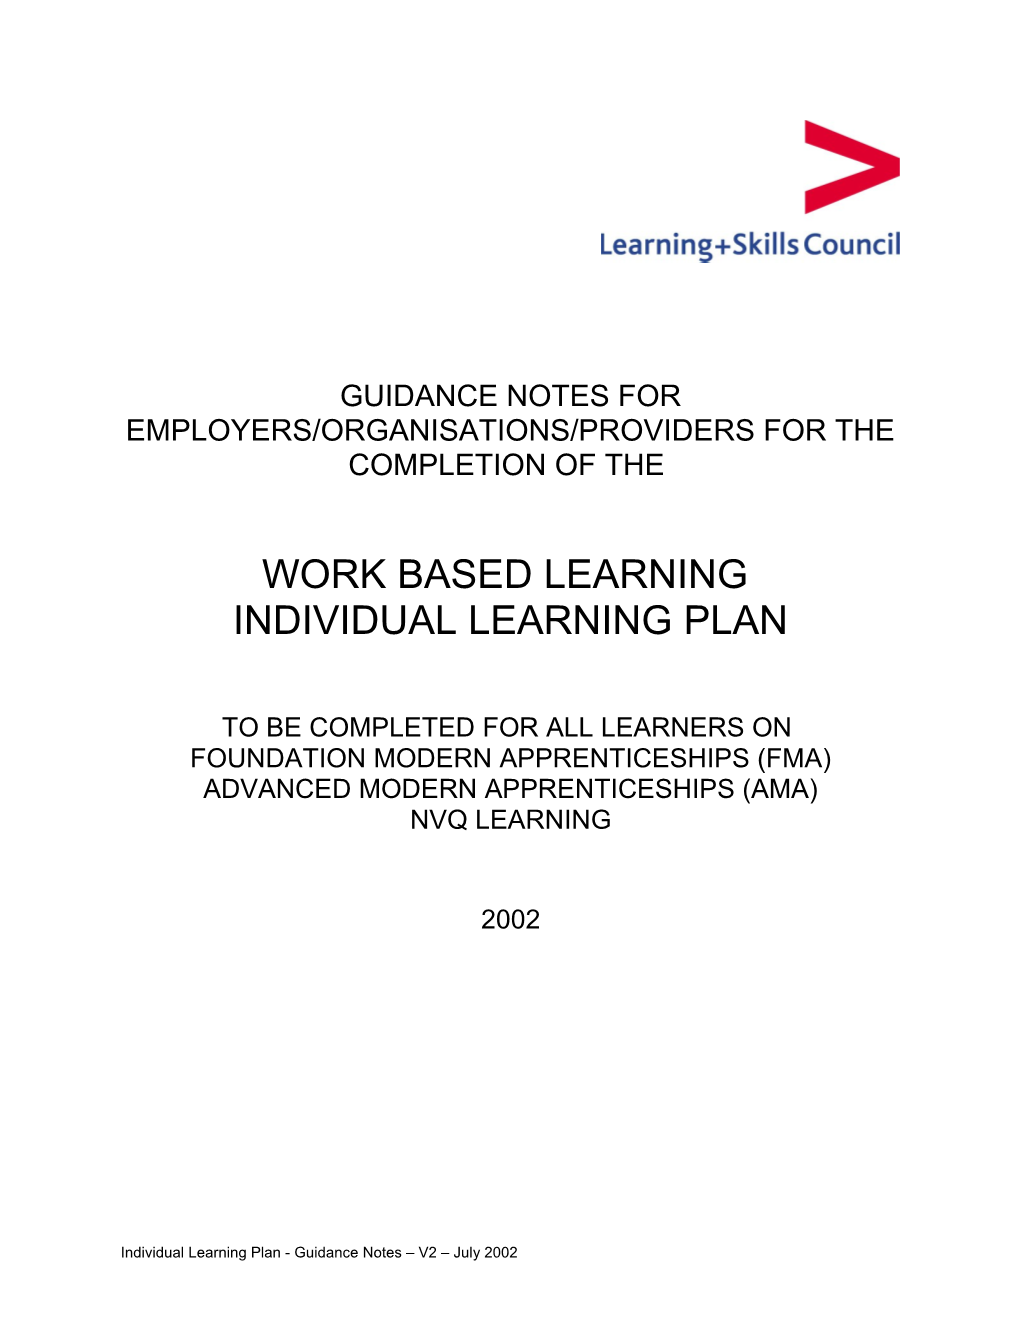 Guidance Notes for Employers/Organisations/Providers for the Completion of The